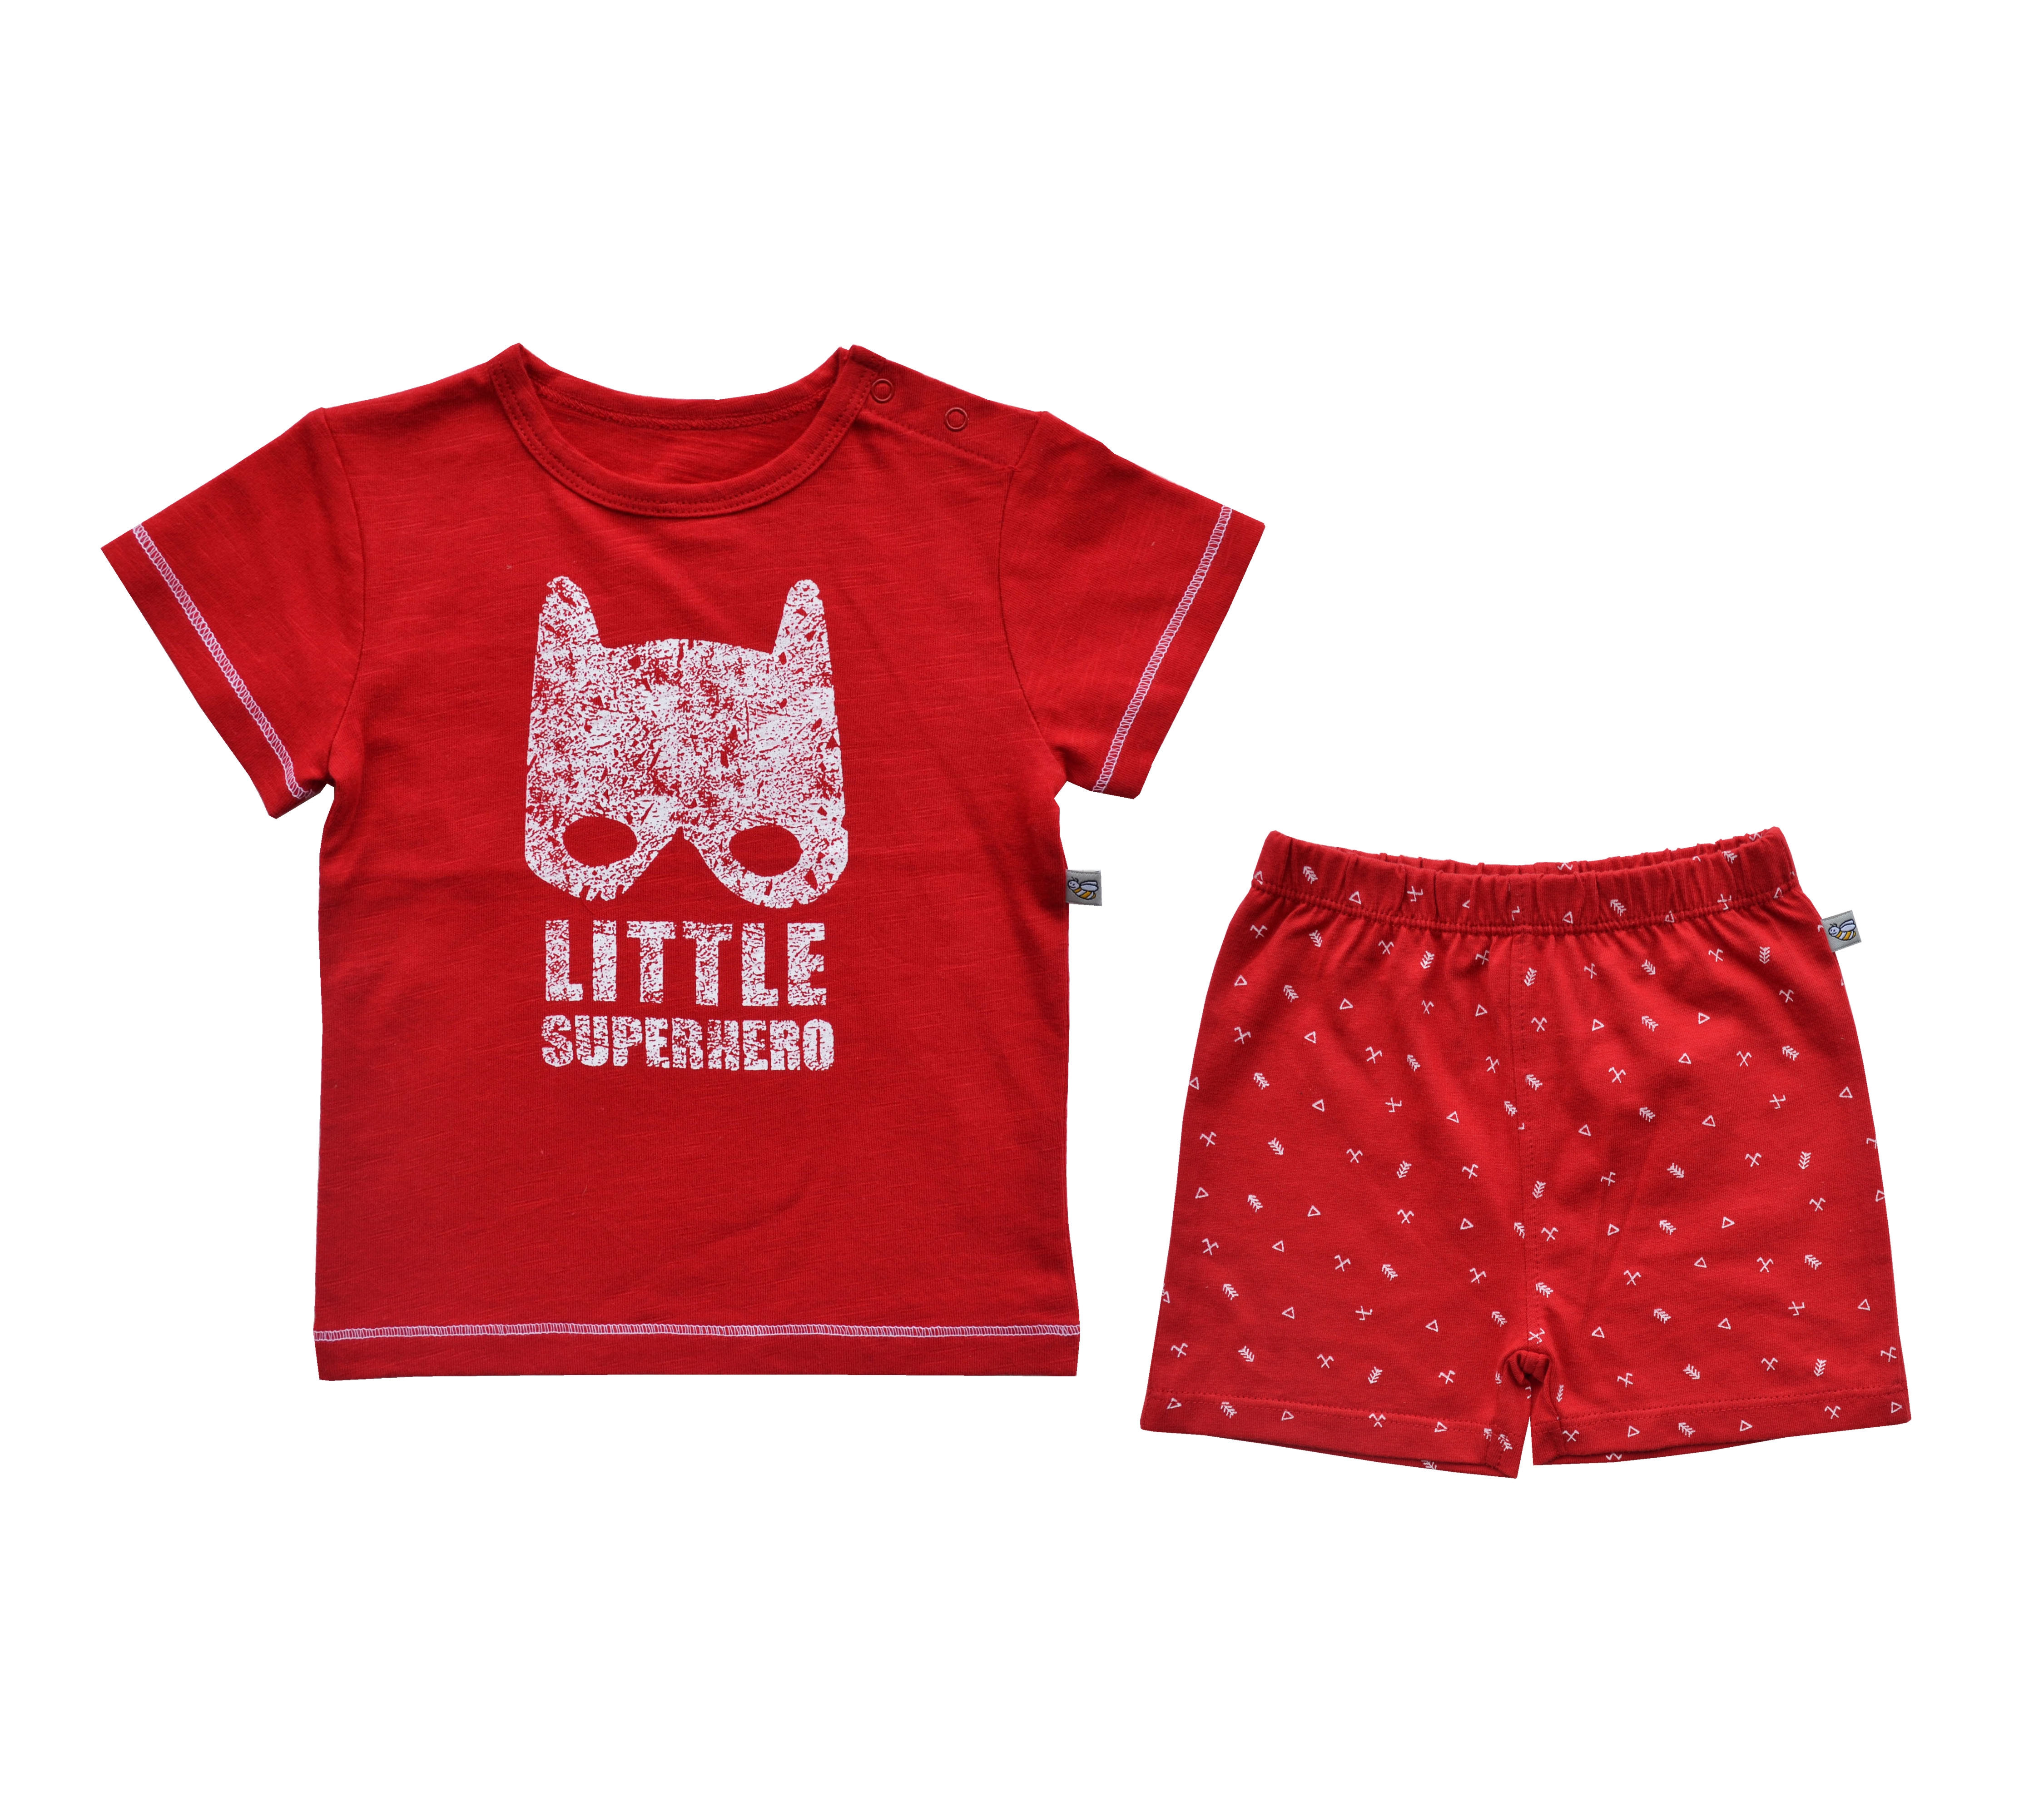 Little Superhero Print Red T-Shirt + Red Allover Printed Shorty Set (100% Cotton Single Jersey)